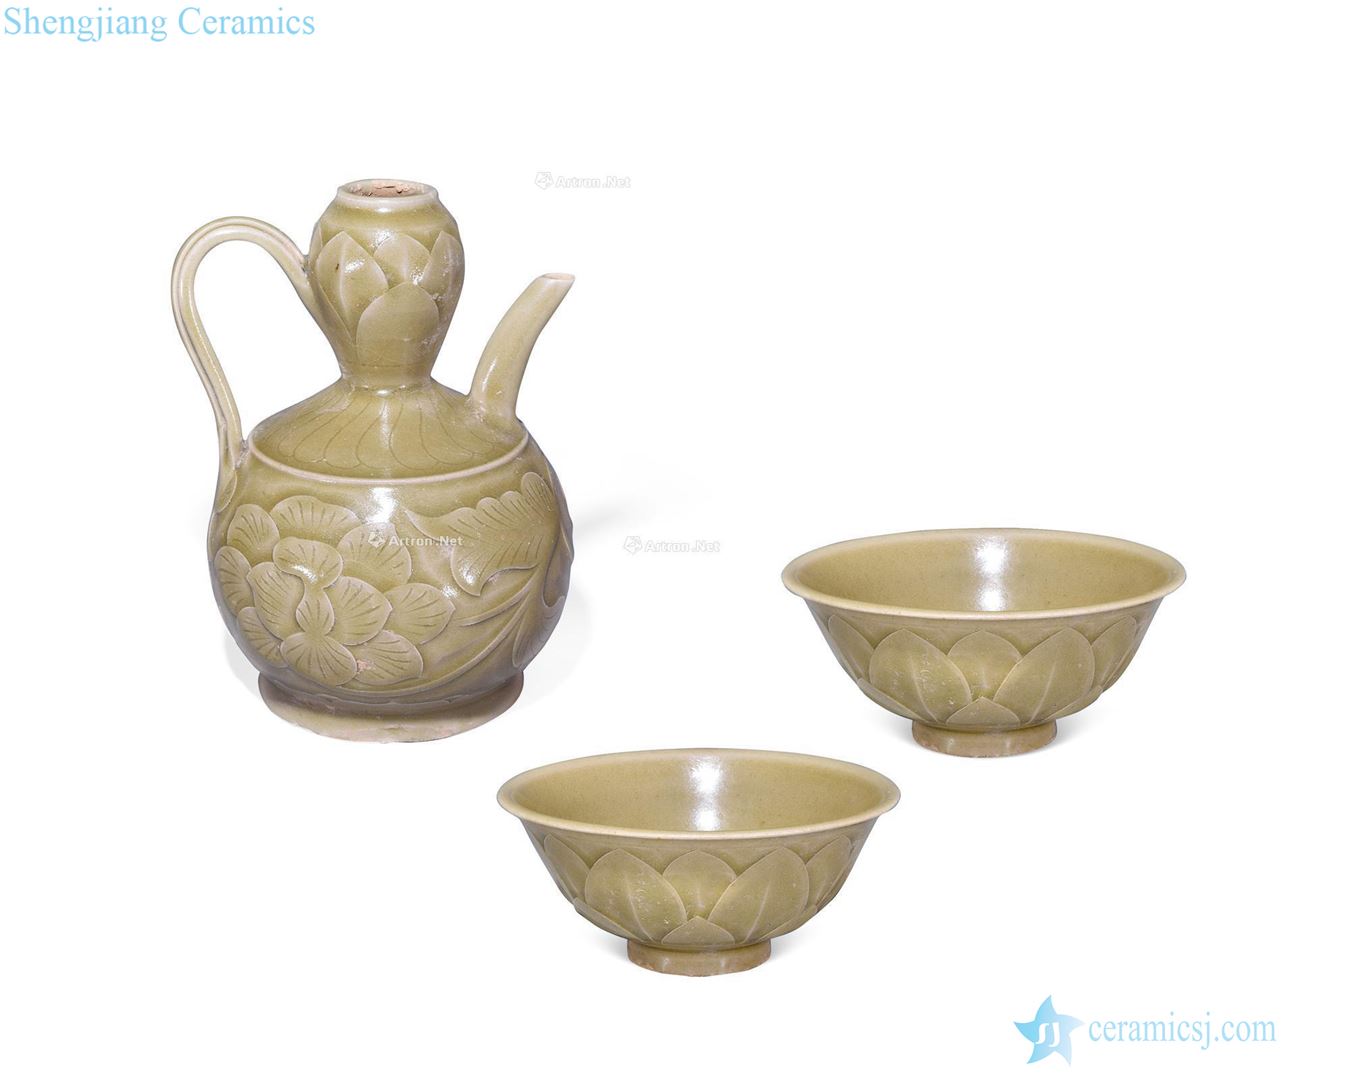 The song dynasty Yao state kiln carved decorative pattern commentary bowl (three-piece suit)